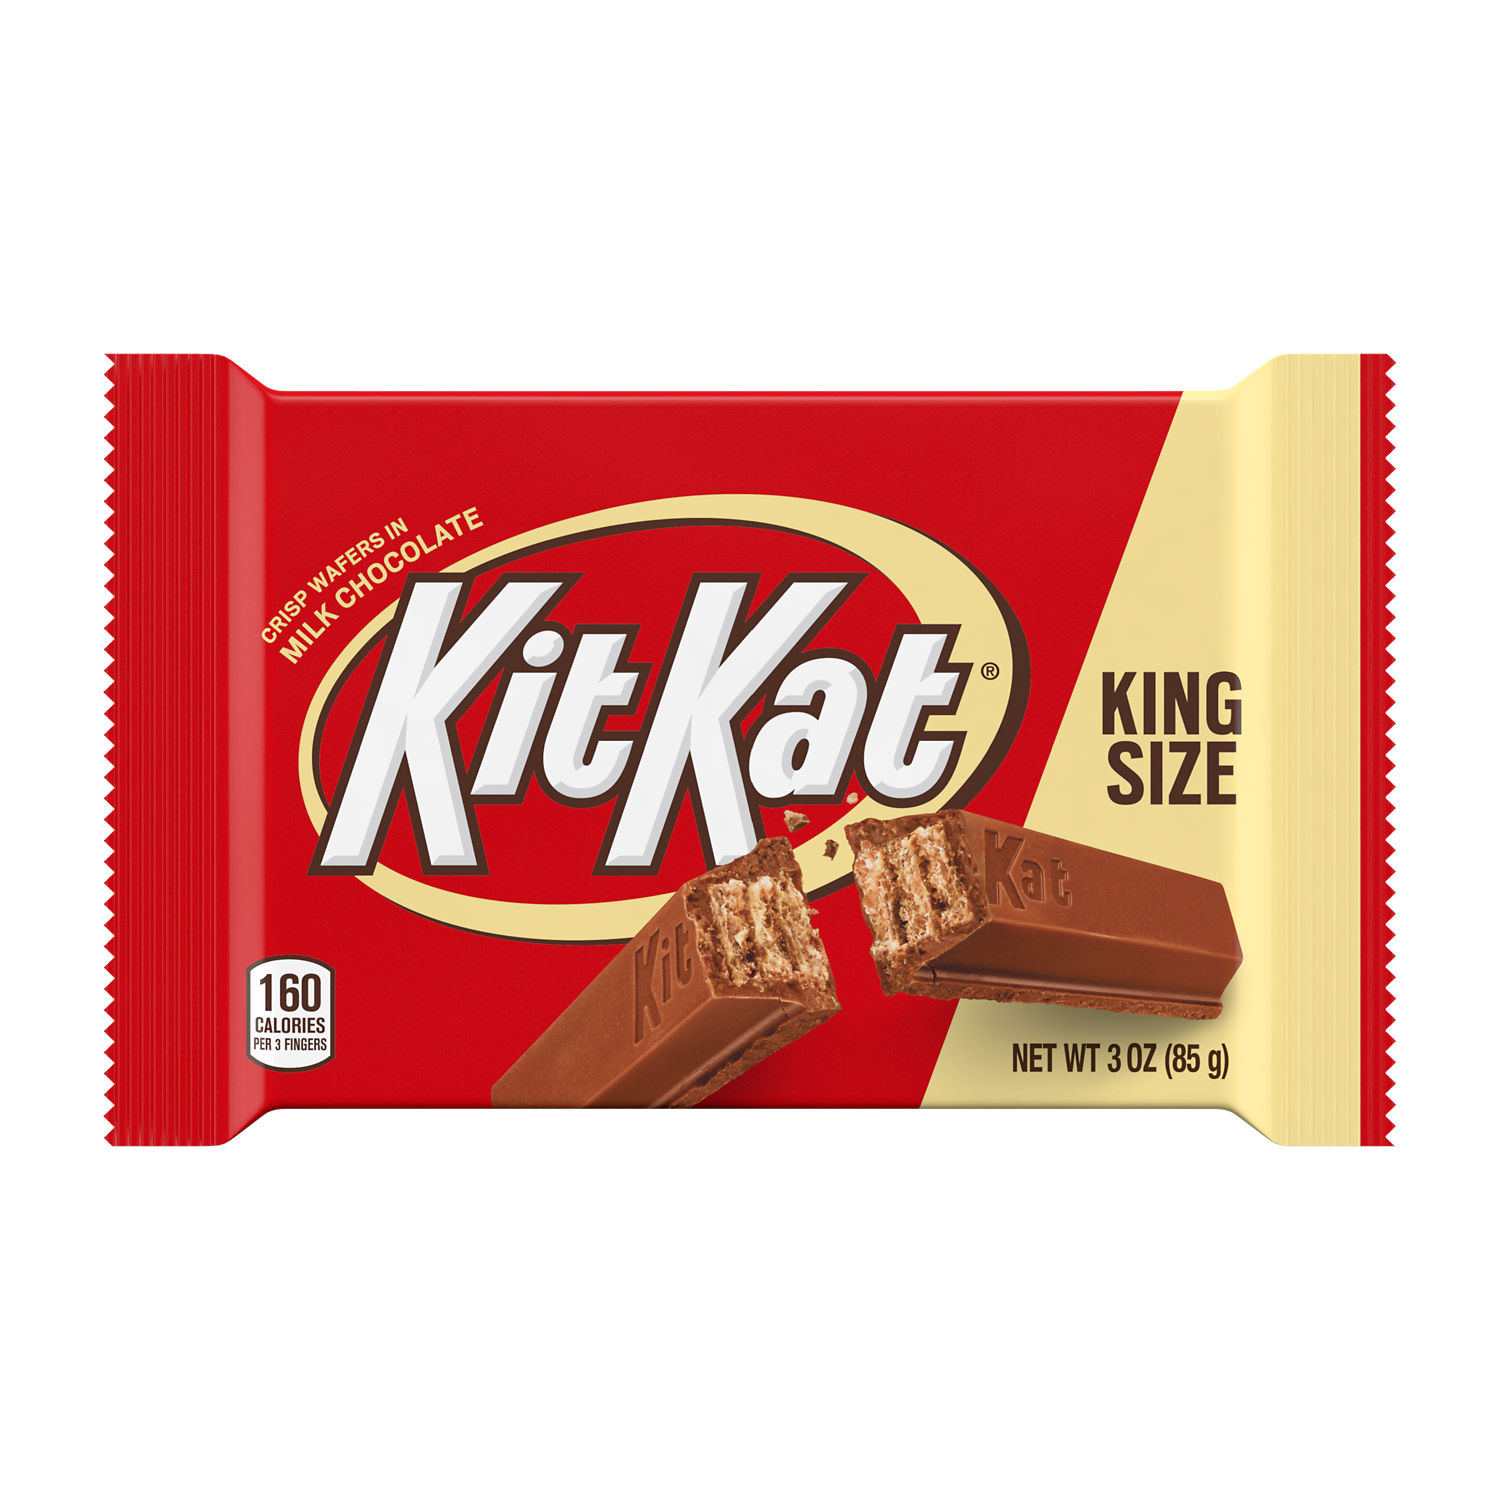 Hershey's Milk Chocolate with Almonds King Size Bar - Shop Candy